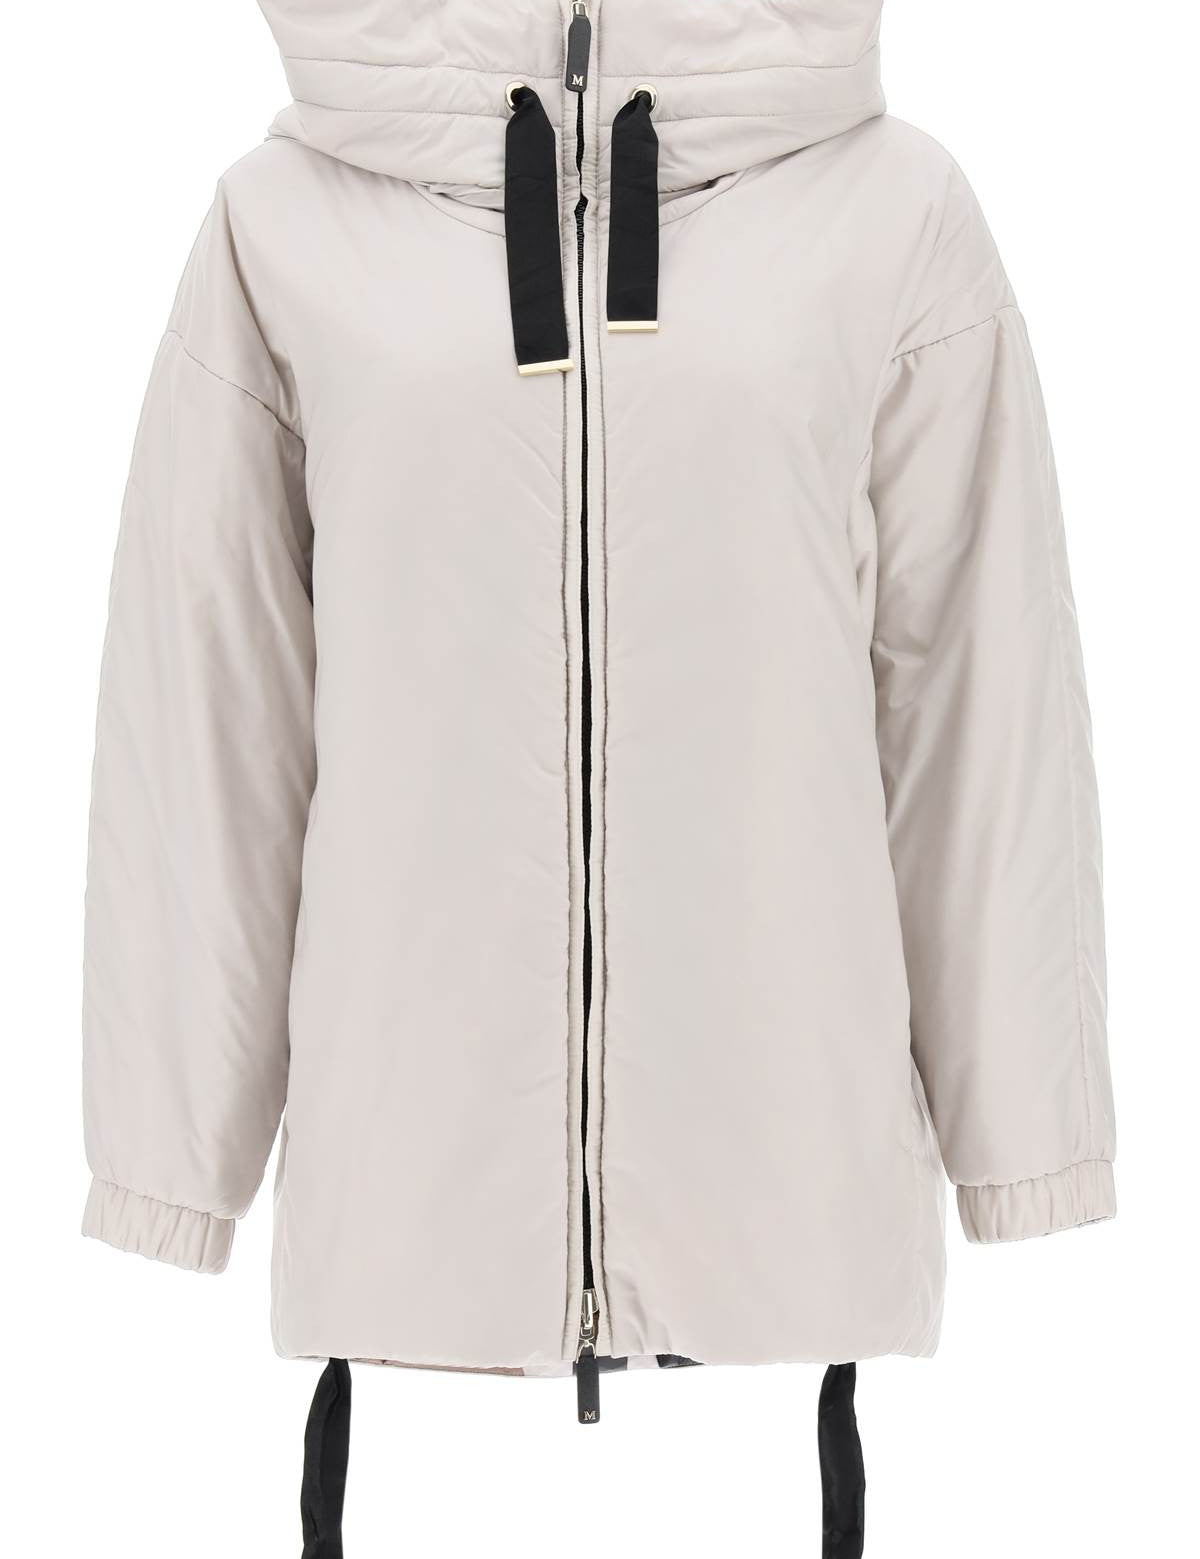 max-mara-the-cube-greenlo-reversible-jacket-with-cameluxe-padding_6c933c02-aa88-465b-ae63-59a2e5ee9b14.jpg